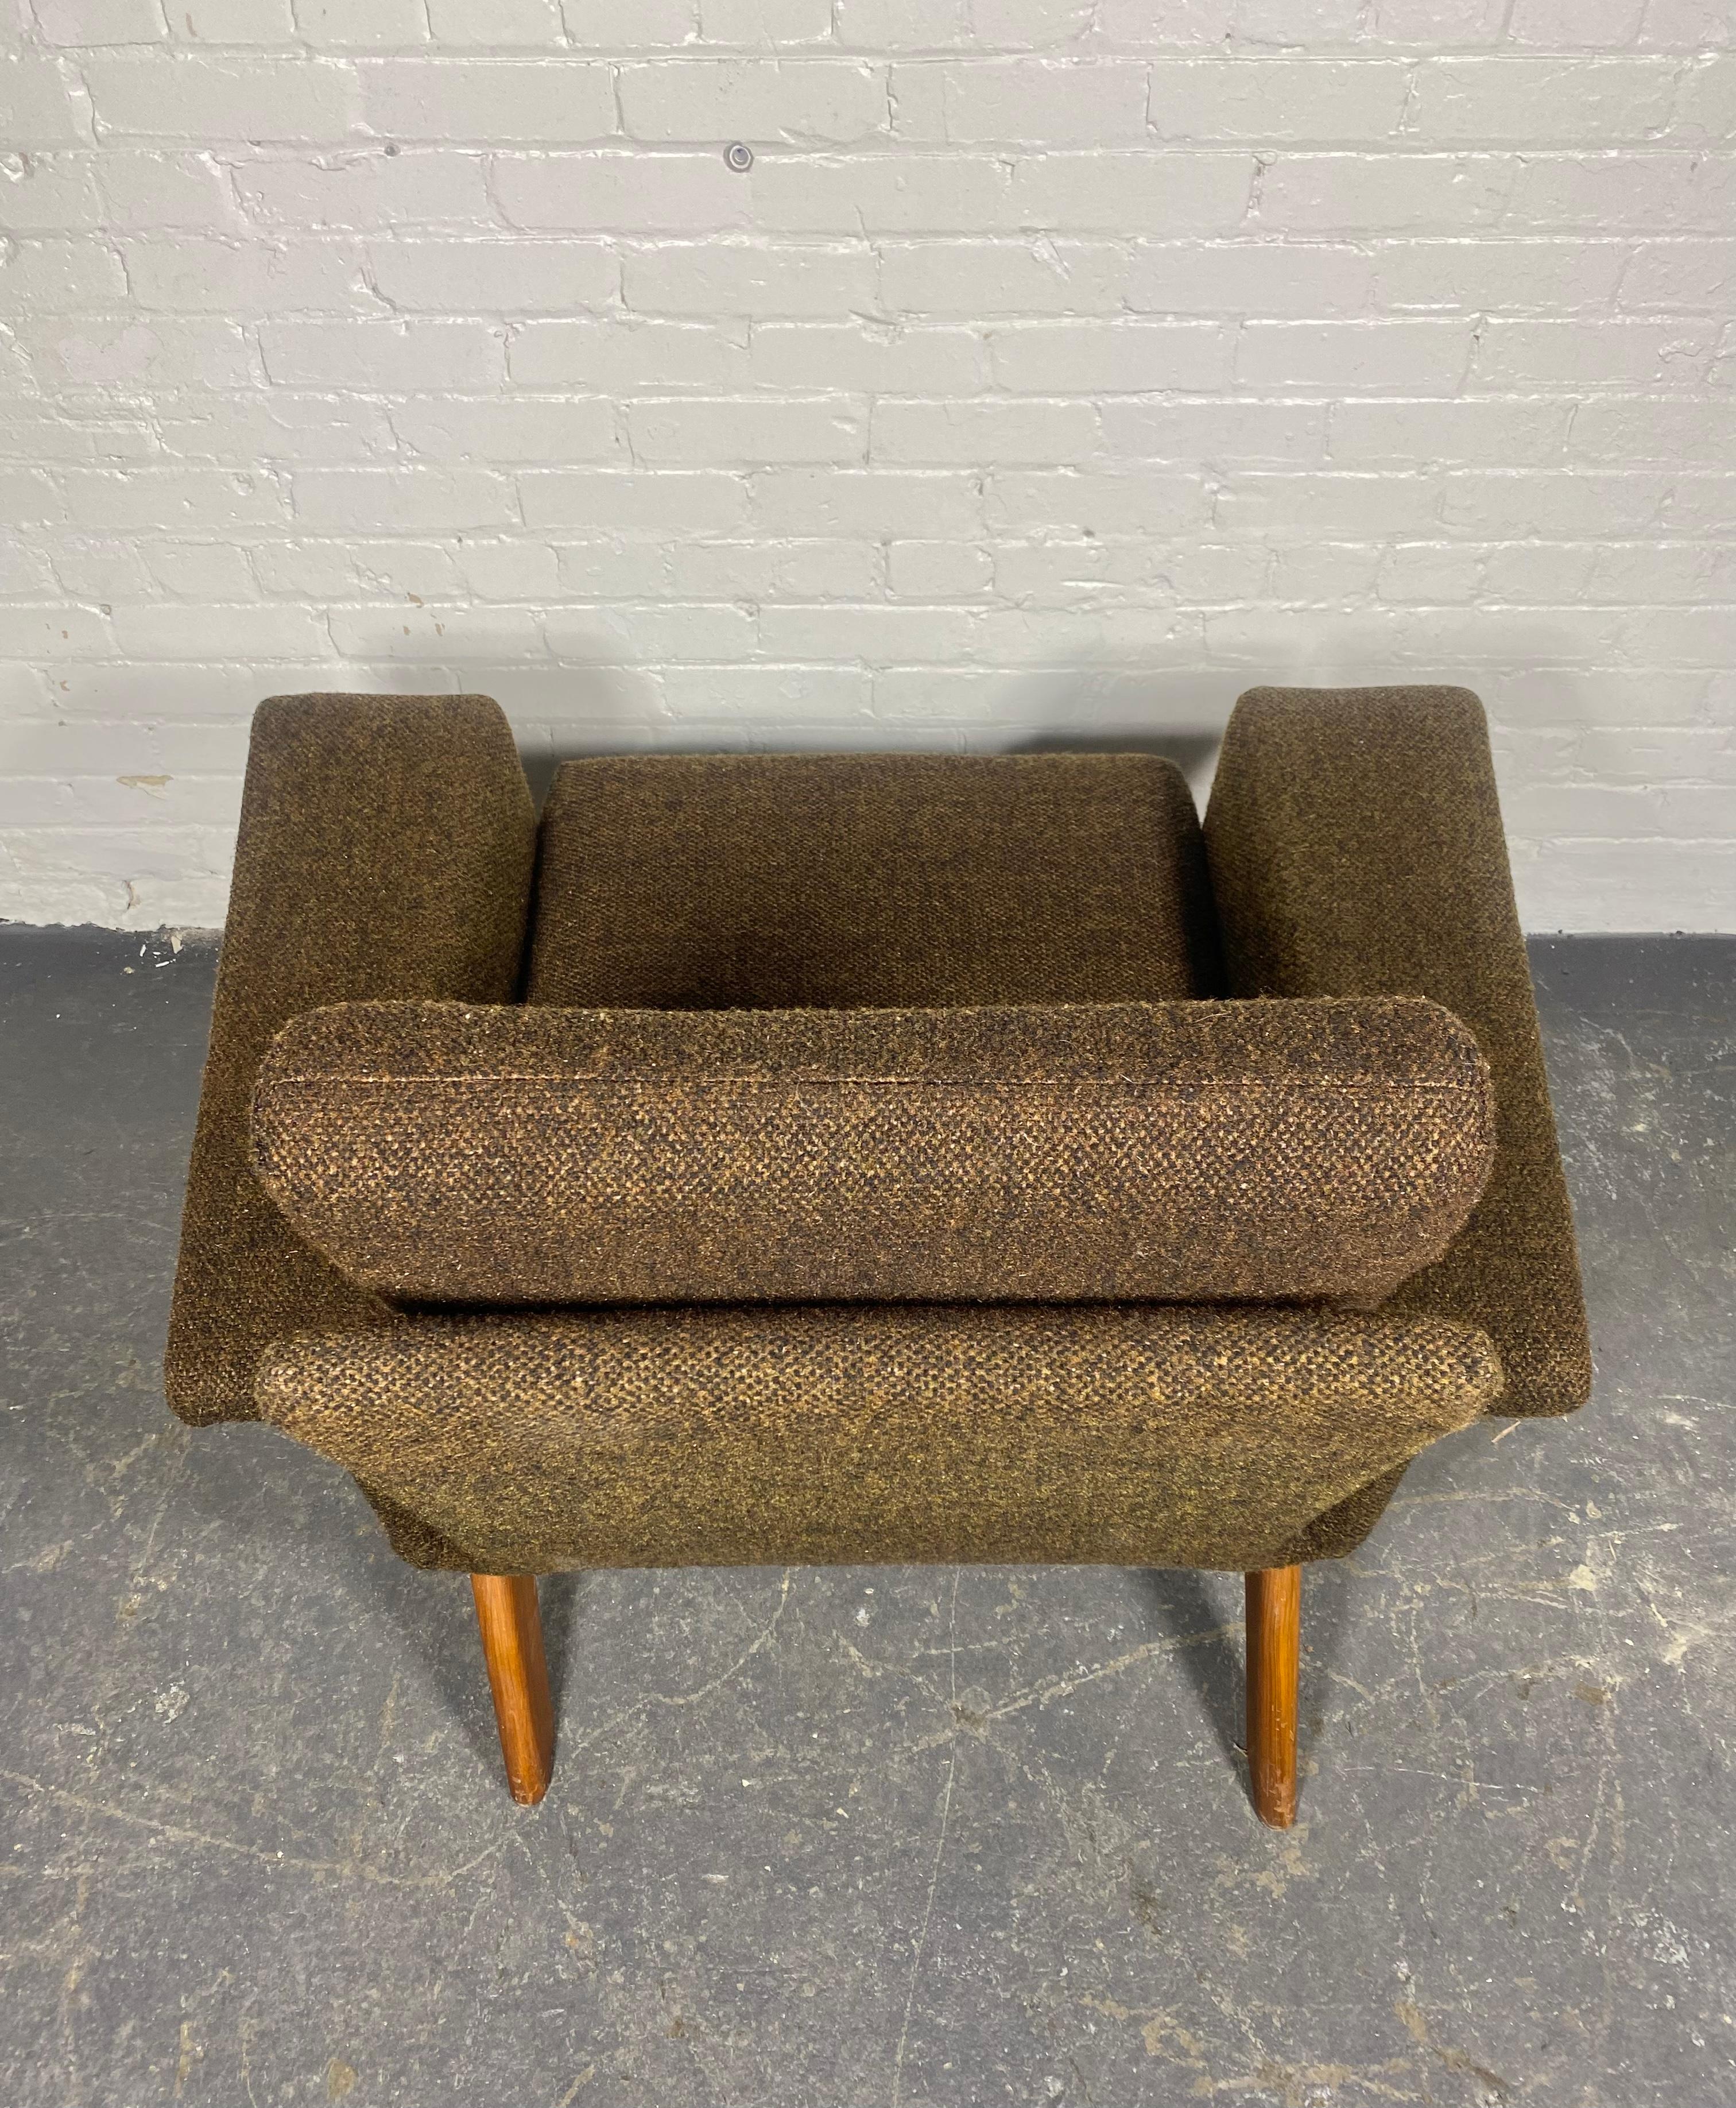 Dramatic Modernist Lounge Chair by Adrian Pearsall.Sculptural Walnut Base. For Sale 1